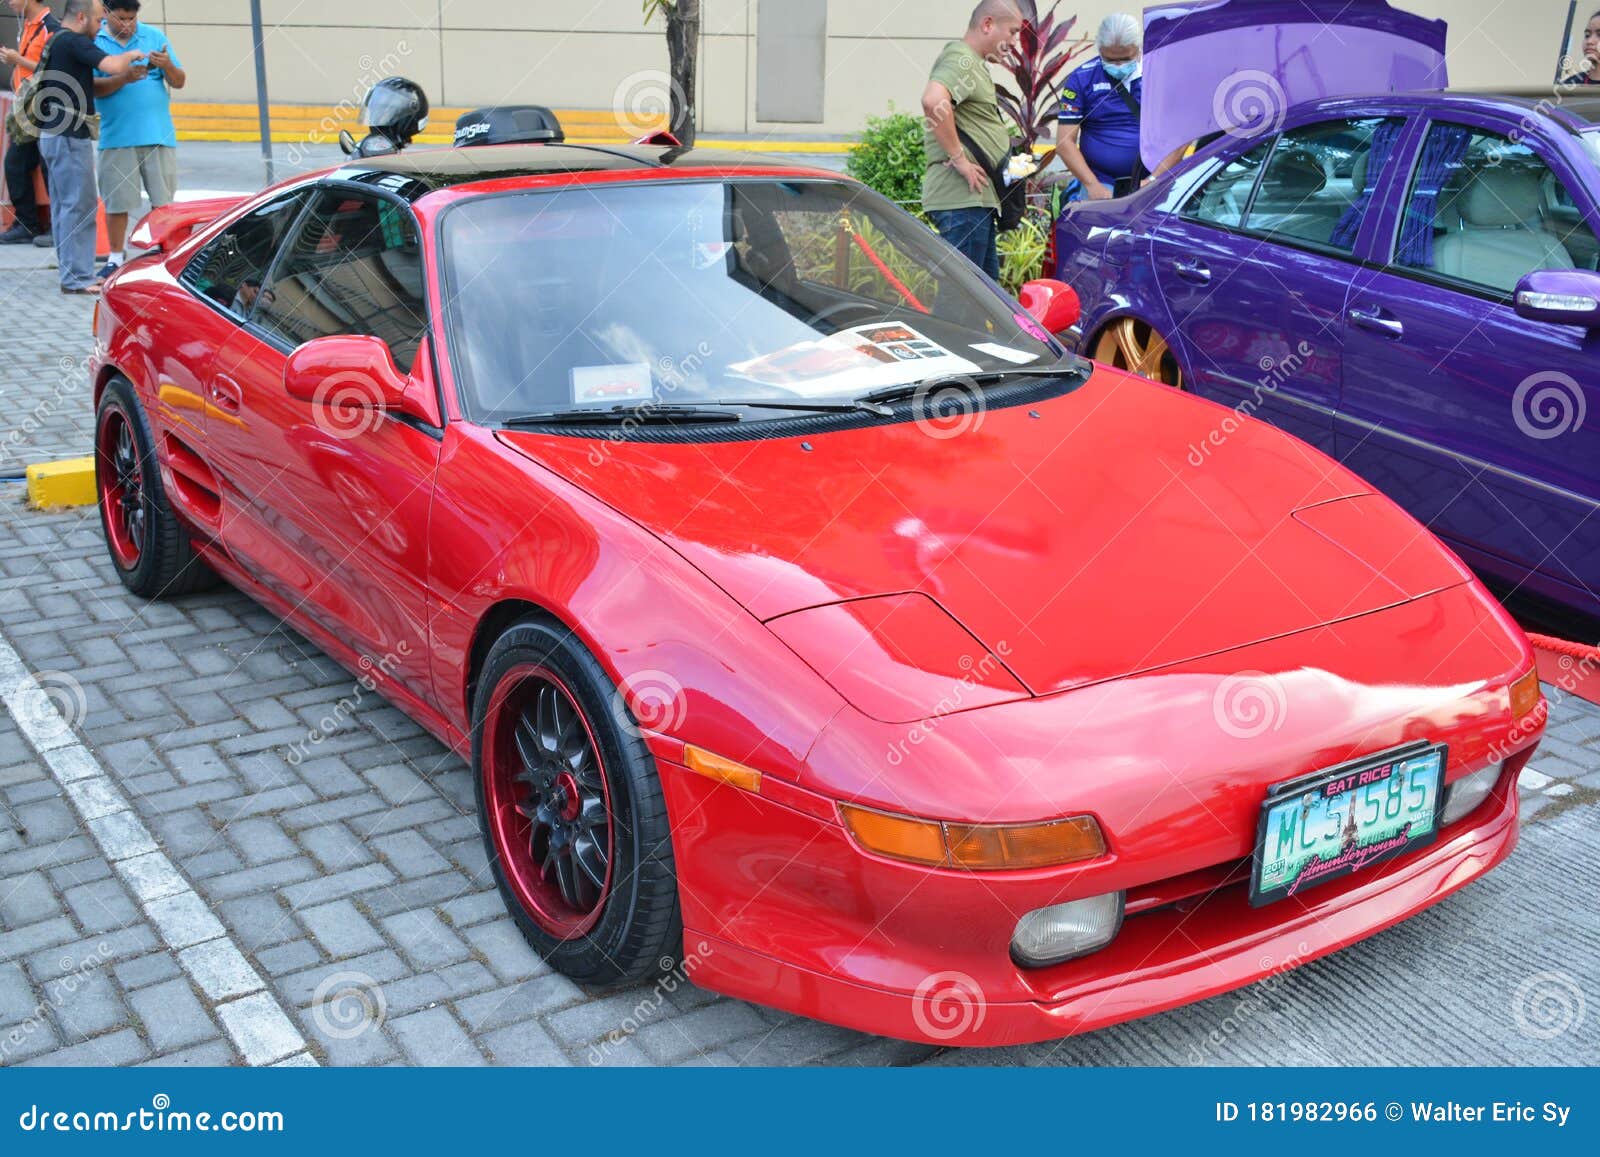 Toyota Mr2 Sw20 Gts In Quezon City Philippines Editorial Photo Image Of Expo Transport 181982966